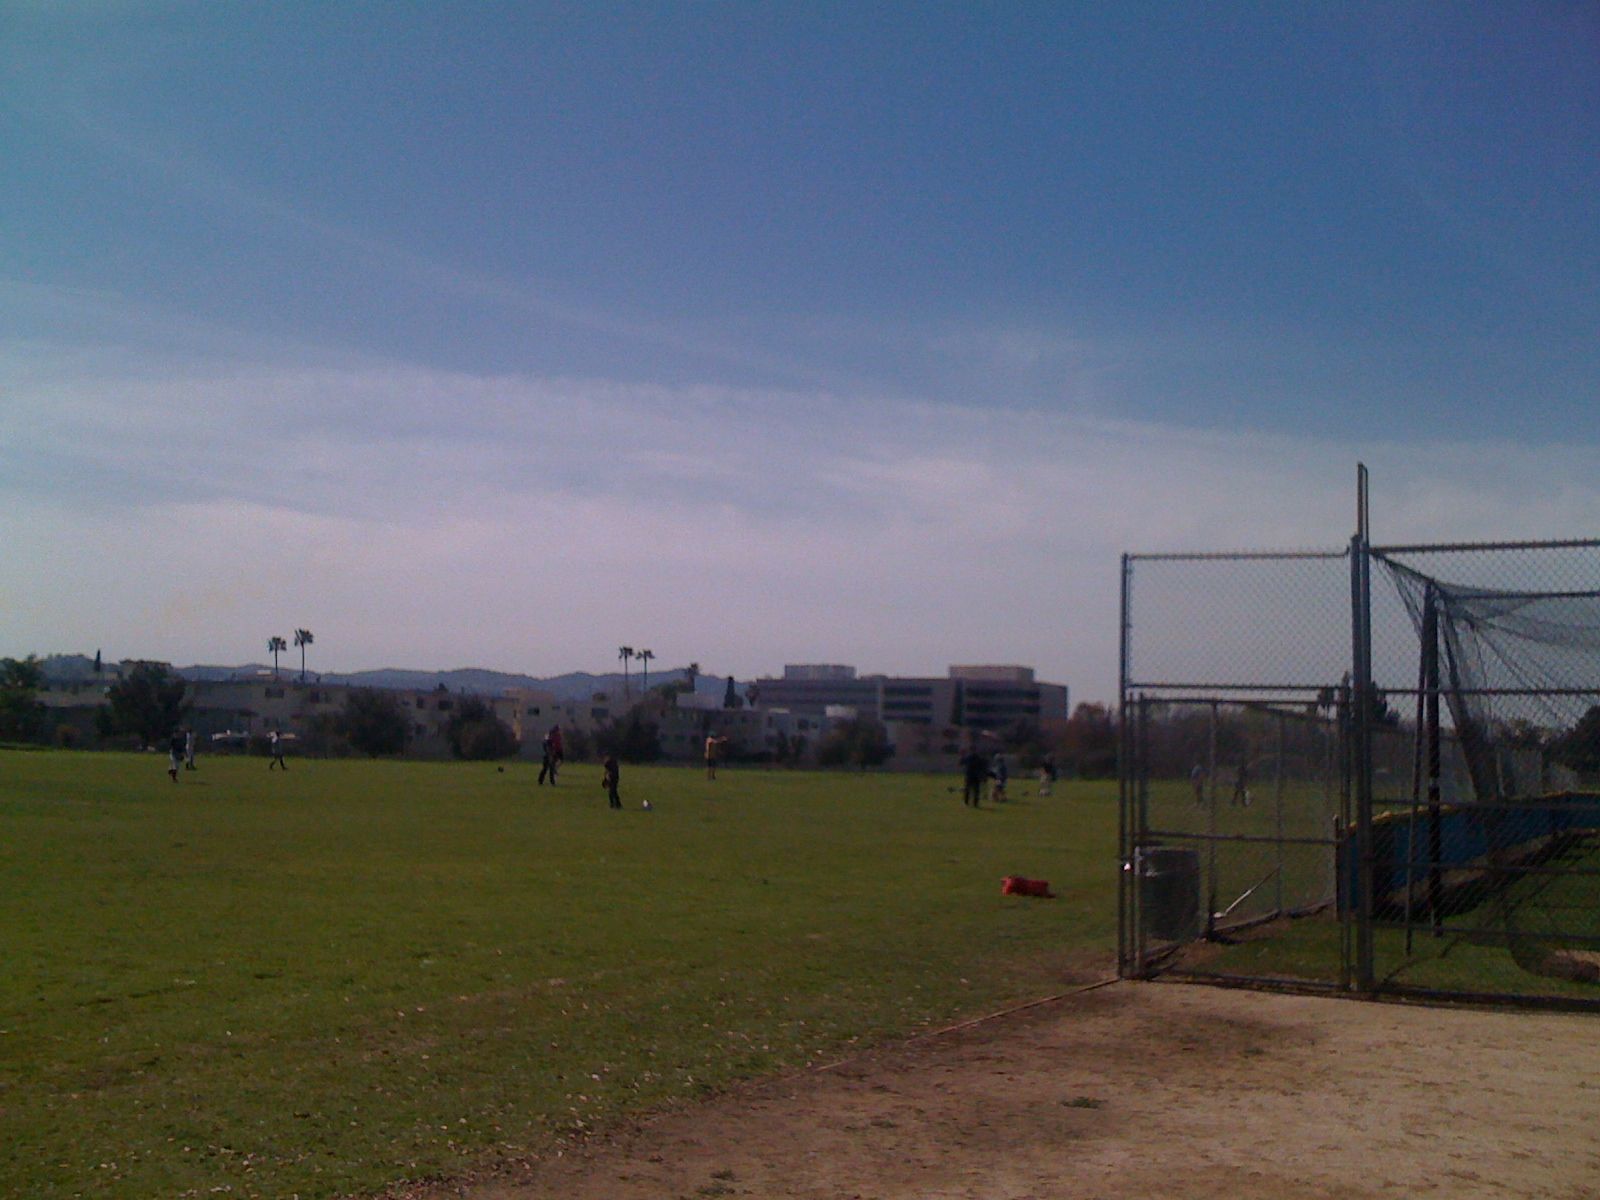 Sunny and clear day at the ball field